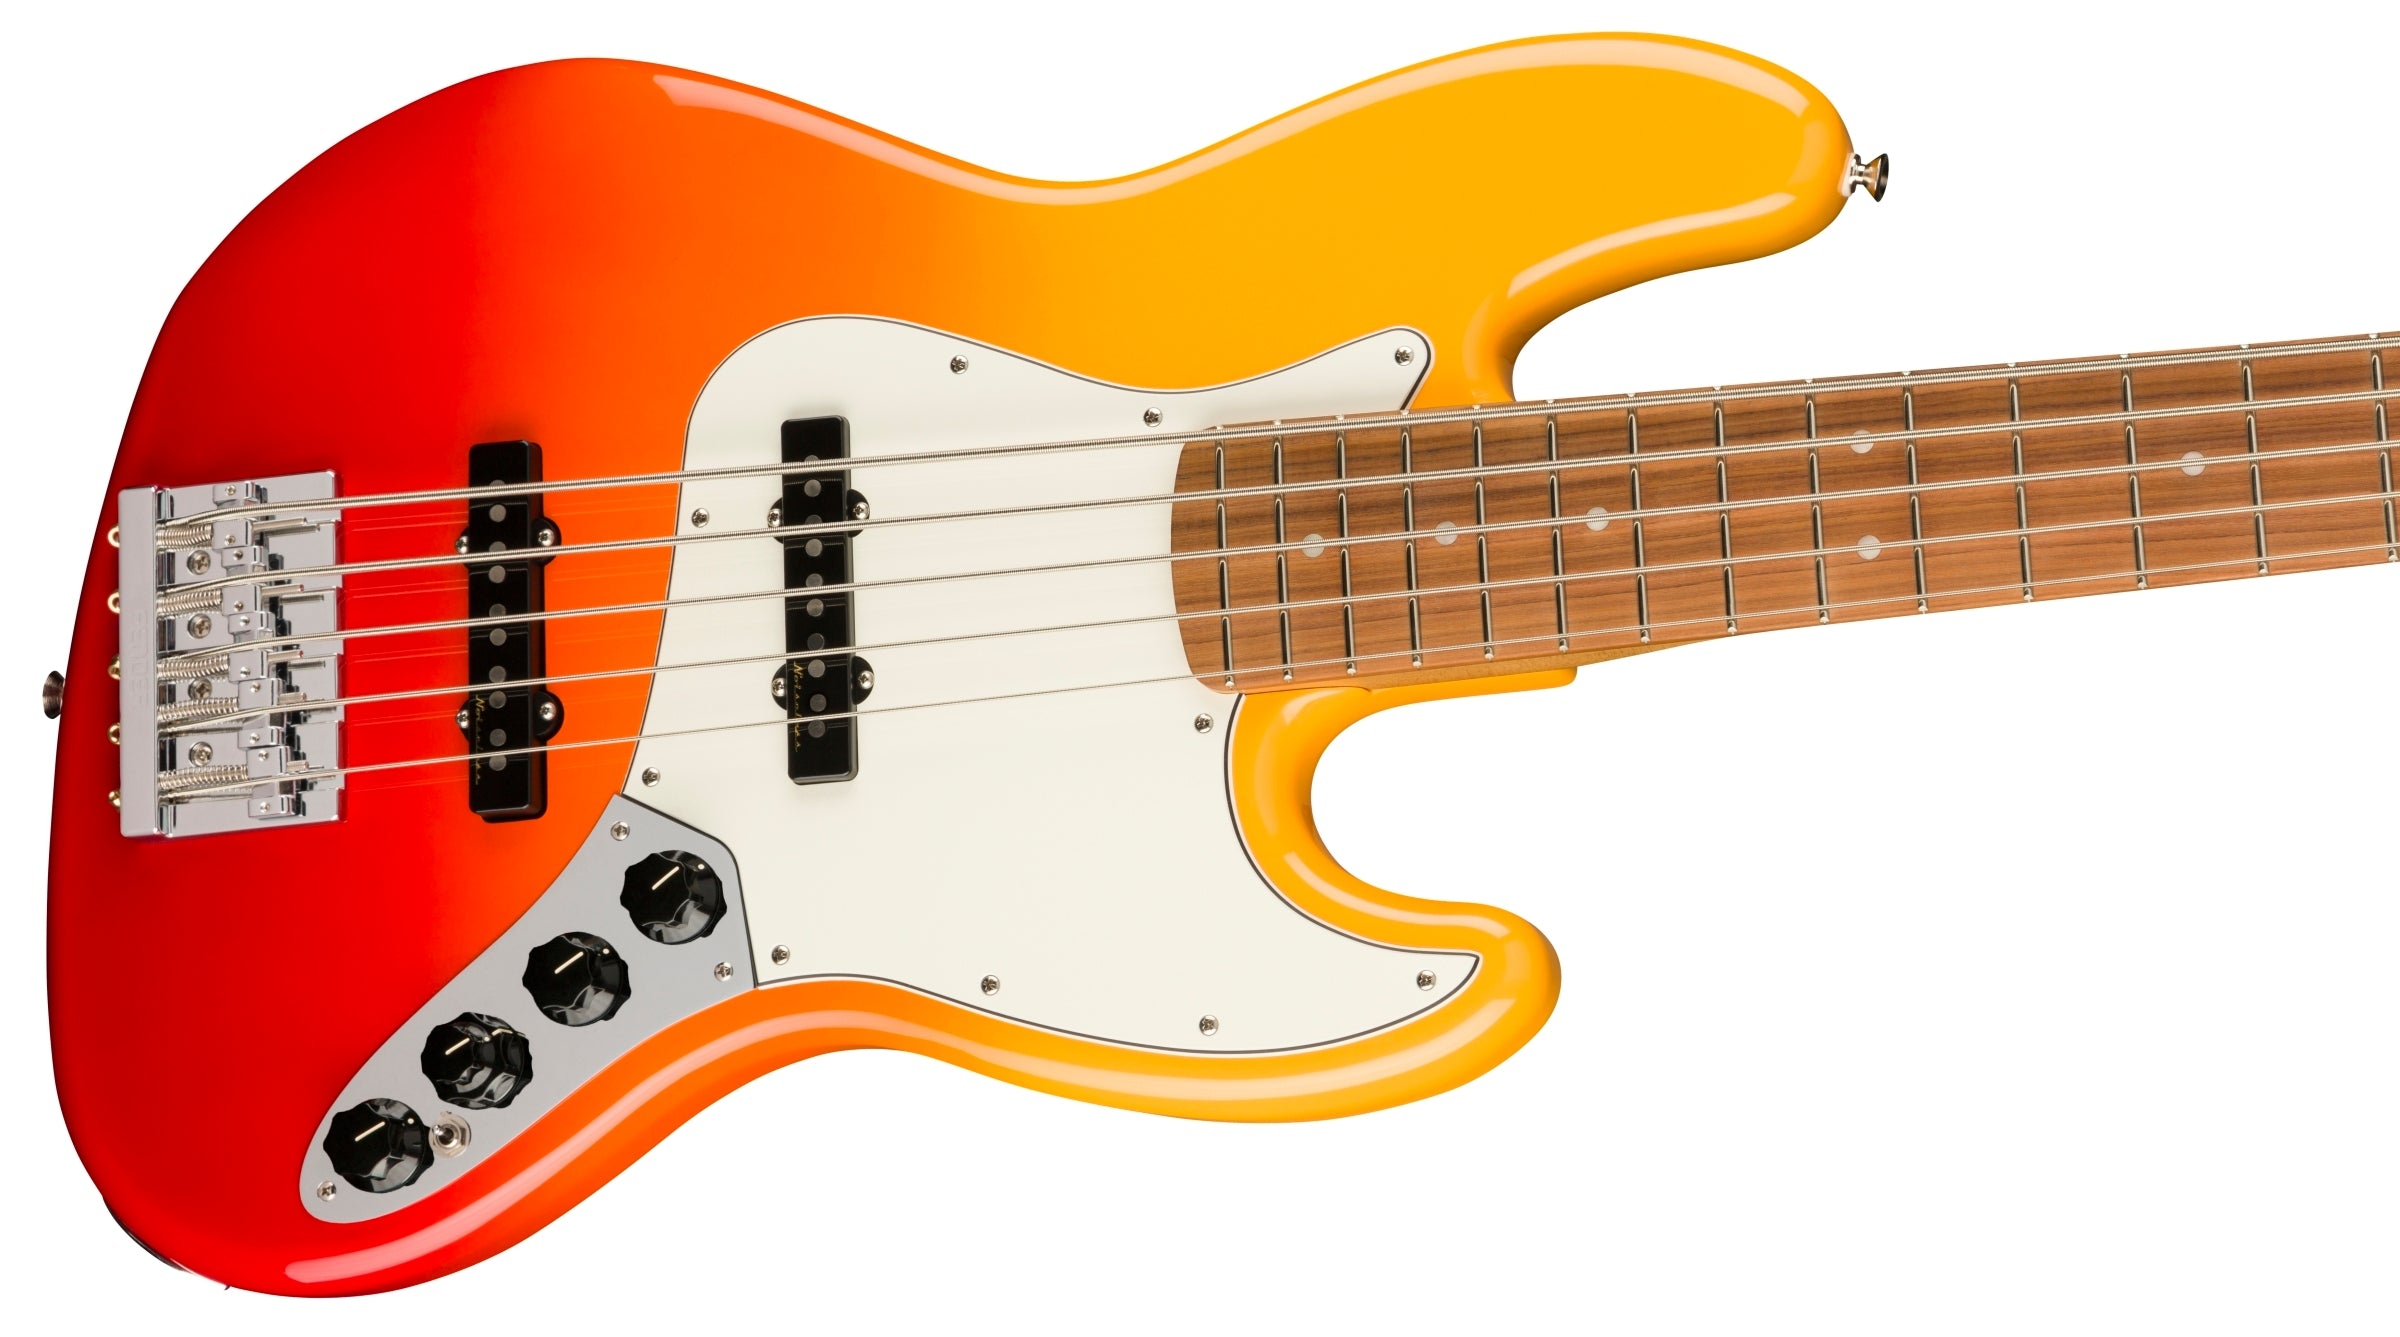 Fender Player Plus Active 5-String Electric Bass - Tequila Sunrise